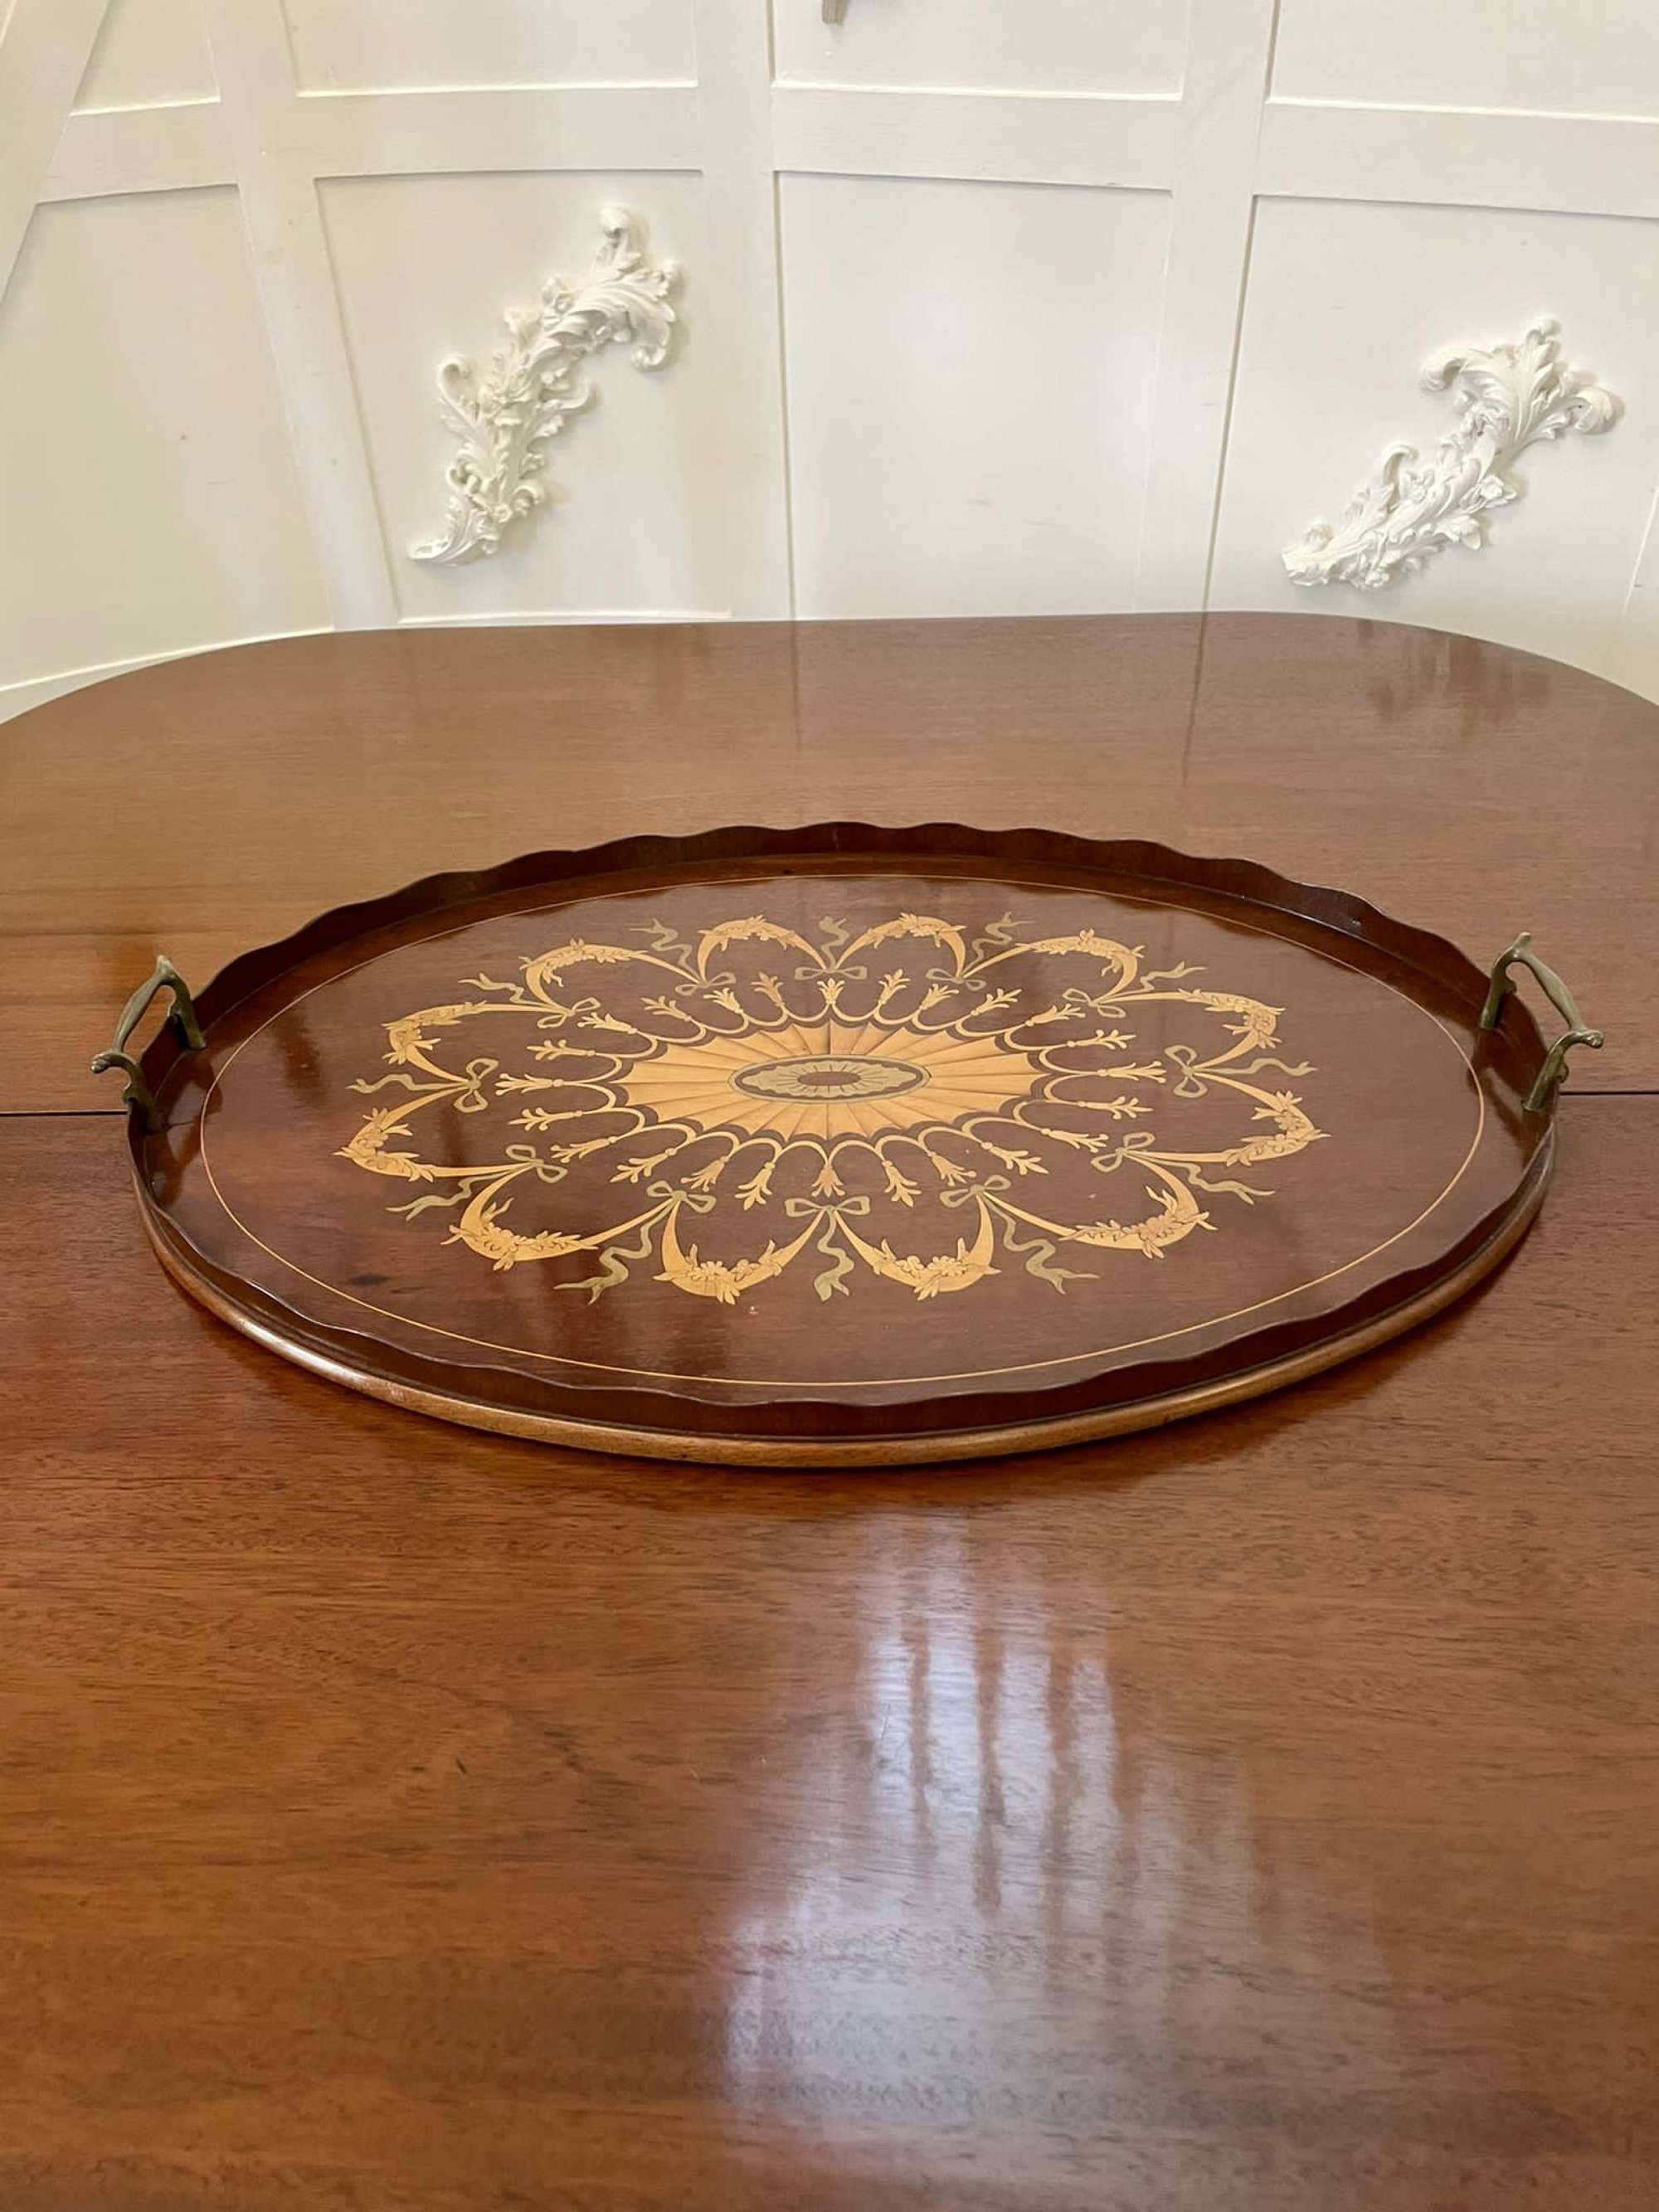 Outstanding Quality Edwardian Inlaid Mahogany Oval Tray